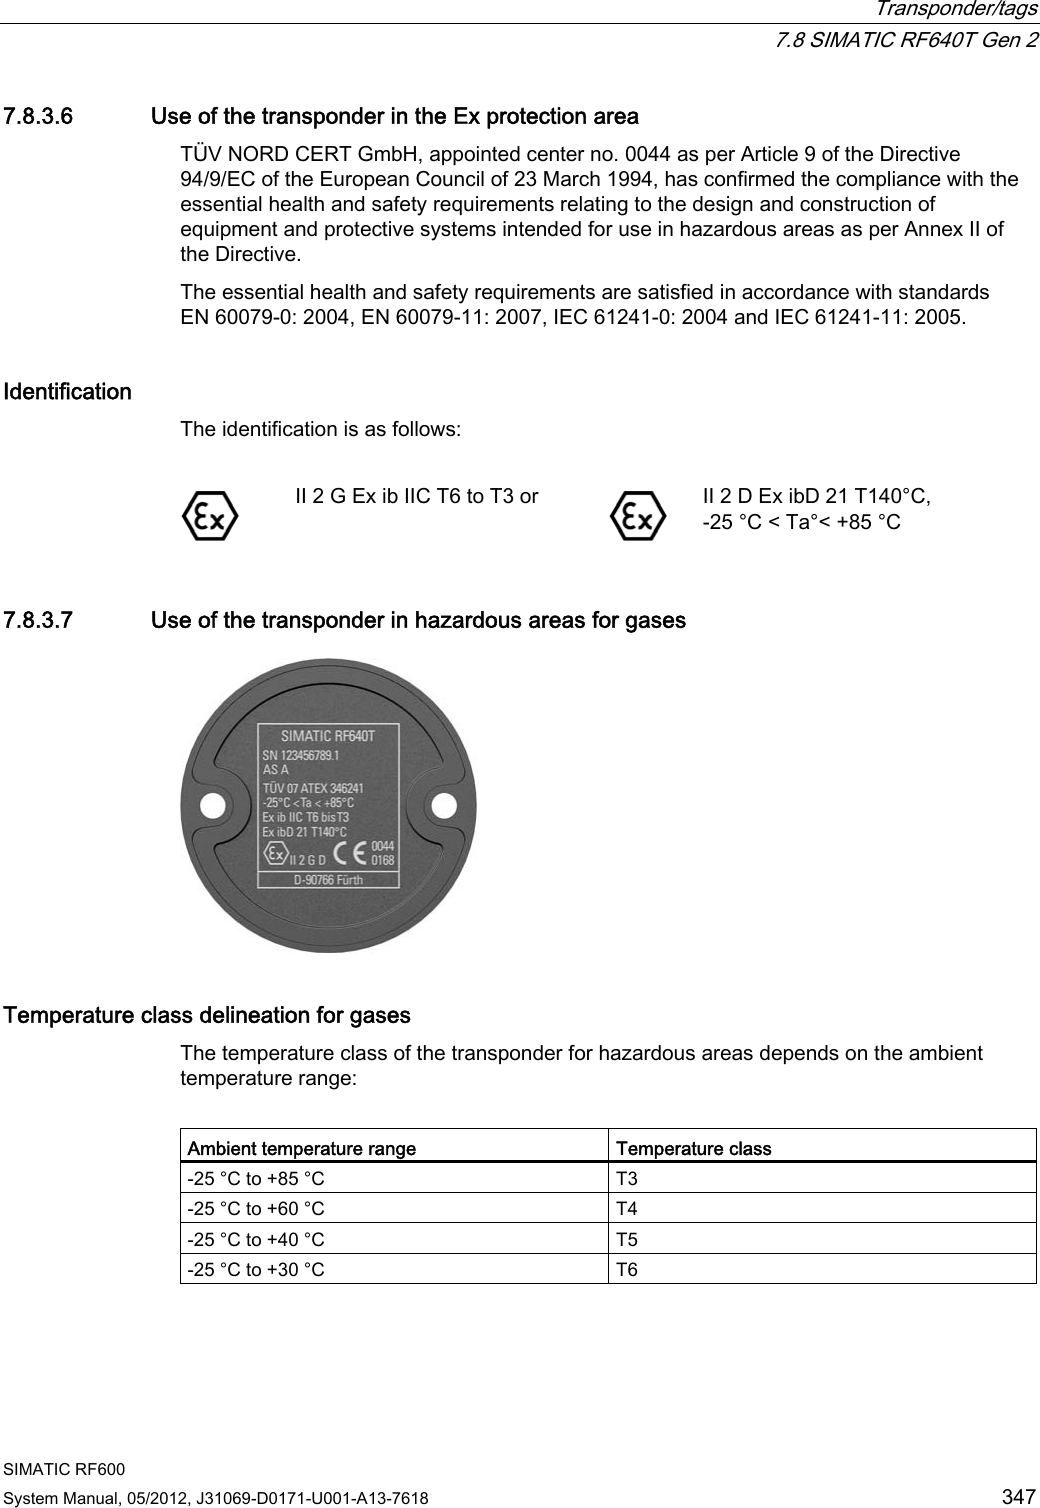  Transponder/tags  7.8 SIMATIC RF640T Gen 2 SIMATIC RF600 System Manual, 05/2012, J31069-D0171-U001-A13-7618  347 7.8.3.6 Use of the transponder in the Ex protection area TÜV NORD CERT GmbH, appointed center no. 0044 as per Article 9 of the Directive 94/9/EC of the European Council of 23 March 1994, has confirmed the compliance with the essential health and safety requirements relating to the design and construction of equipment and protective systems intended for use in hazardous areas as per Annex II of the Directive.  The essential health and safety requirements are satisfied in accordance with standards EN 60079-0: 2004, EN 60079-11: 2007, IEC 61241-0: 2004 and IEC 61241-11: 2005. Identification The identification is as follows:    II 2 G Ex ib IIC T6 to T3 or  II 2 D Ex ibD 21 T140°C,  -25 °C &lt; Ta°&lt; +85 °C 7.8.3.7 Use of the transponder in hazardous areas for gases  Temperature class delineation for gases The temperature class of the transponder for hazardous areas depends on the ambient temperature range:   Ambient temperature range  Temperature class -25 °C to +85 °C  T3 -25 °C to +60 °C  T4 -25 °C to +40 °C  T5 -25 °C to +30 °C  T6  